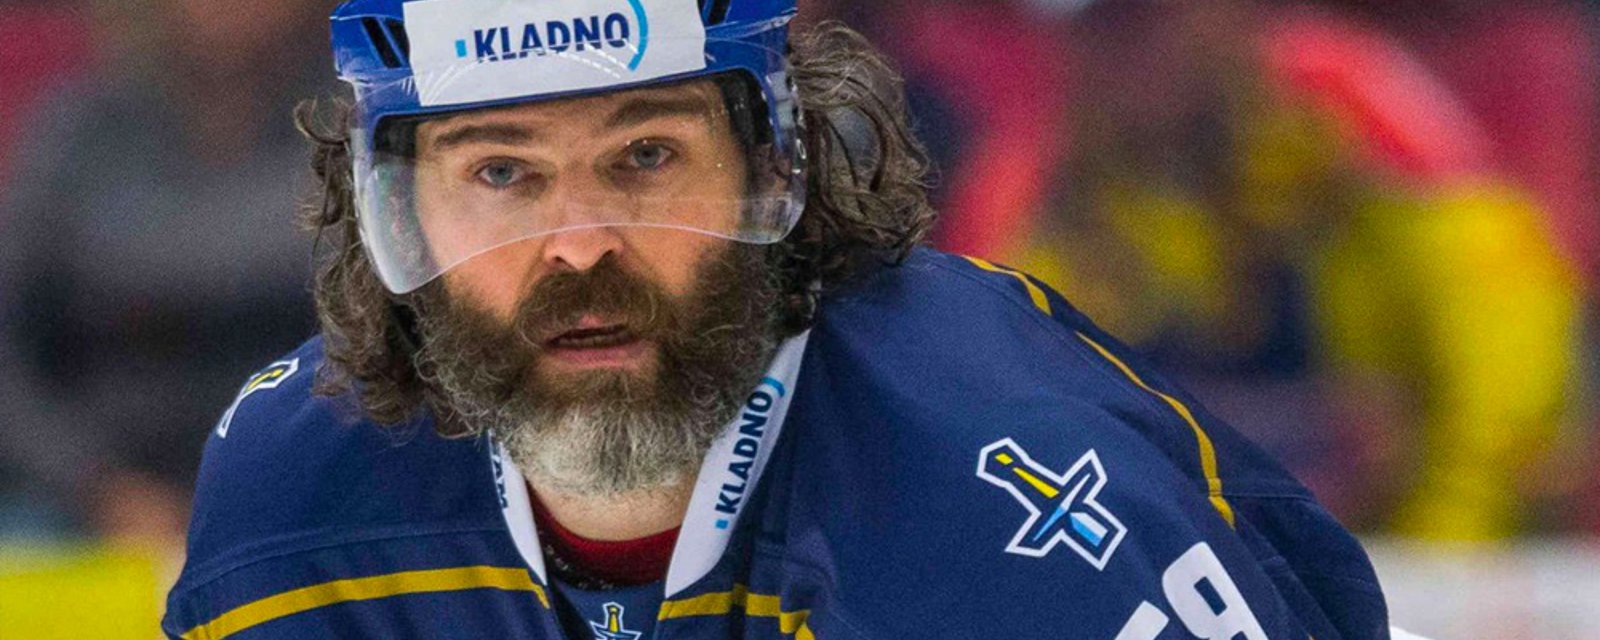 Jaromir Jagr says he has “no choice” but to play for hometown team Kladno this season or the team will fold